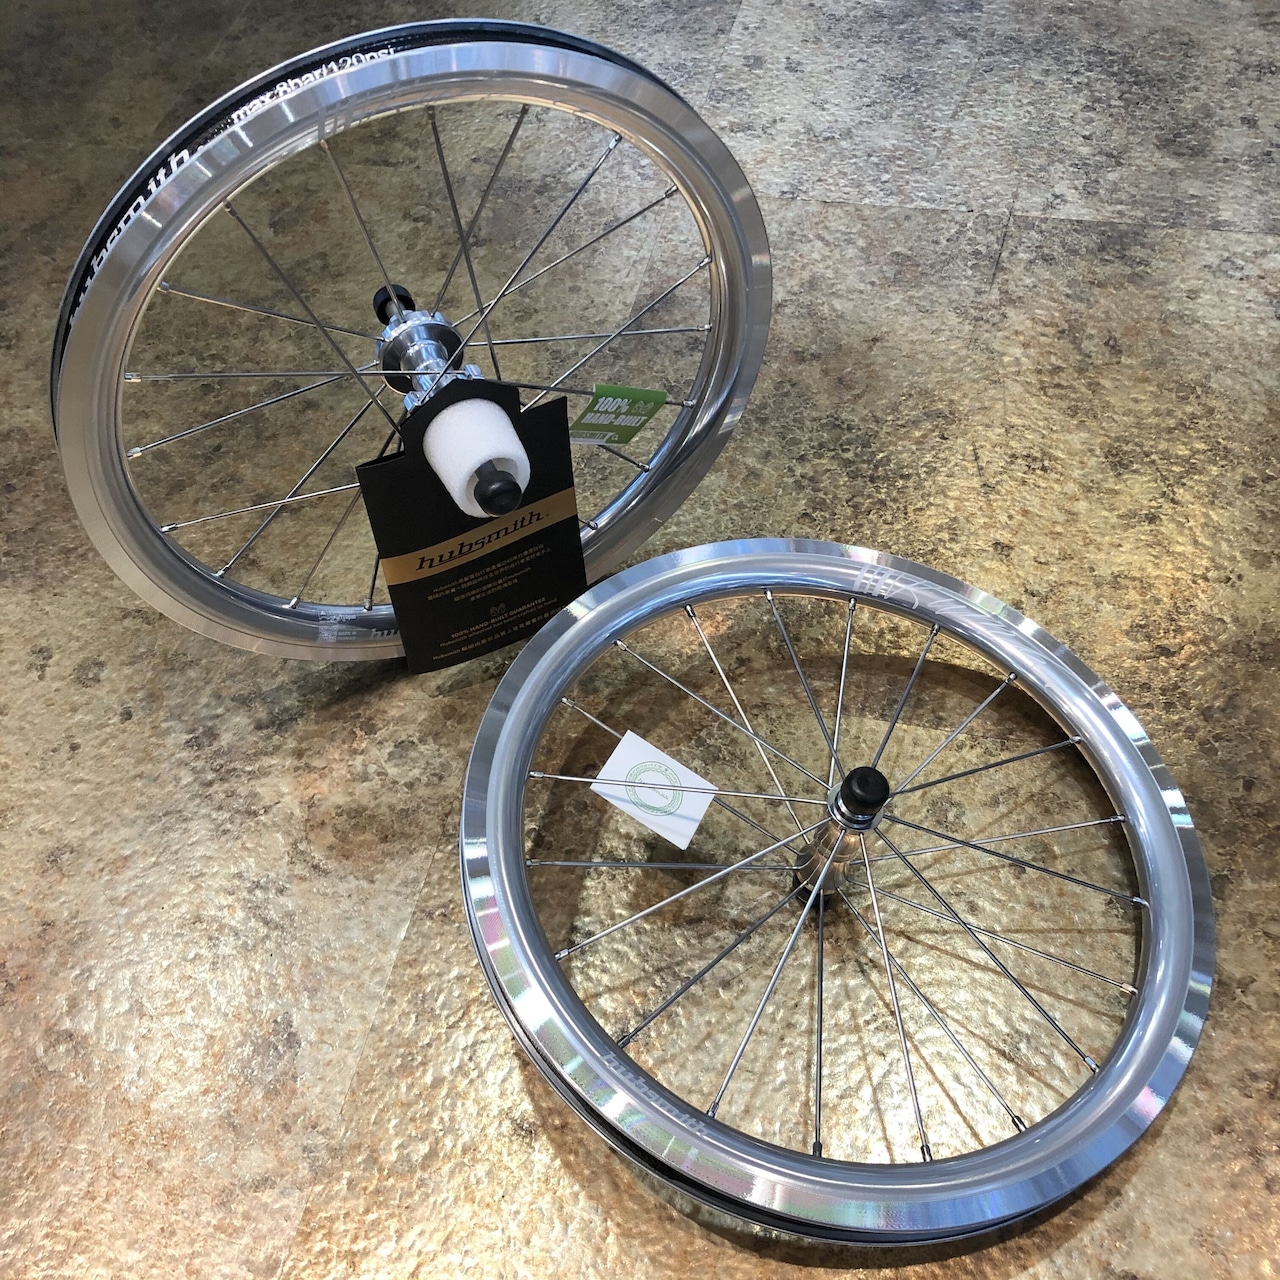 Hubsmith HS-BUMBEE A349 Wheelset  [Silver]